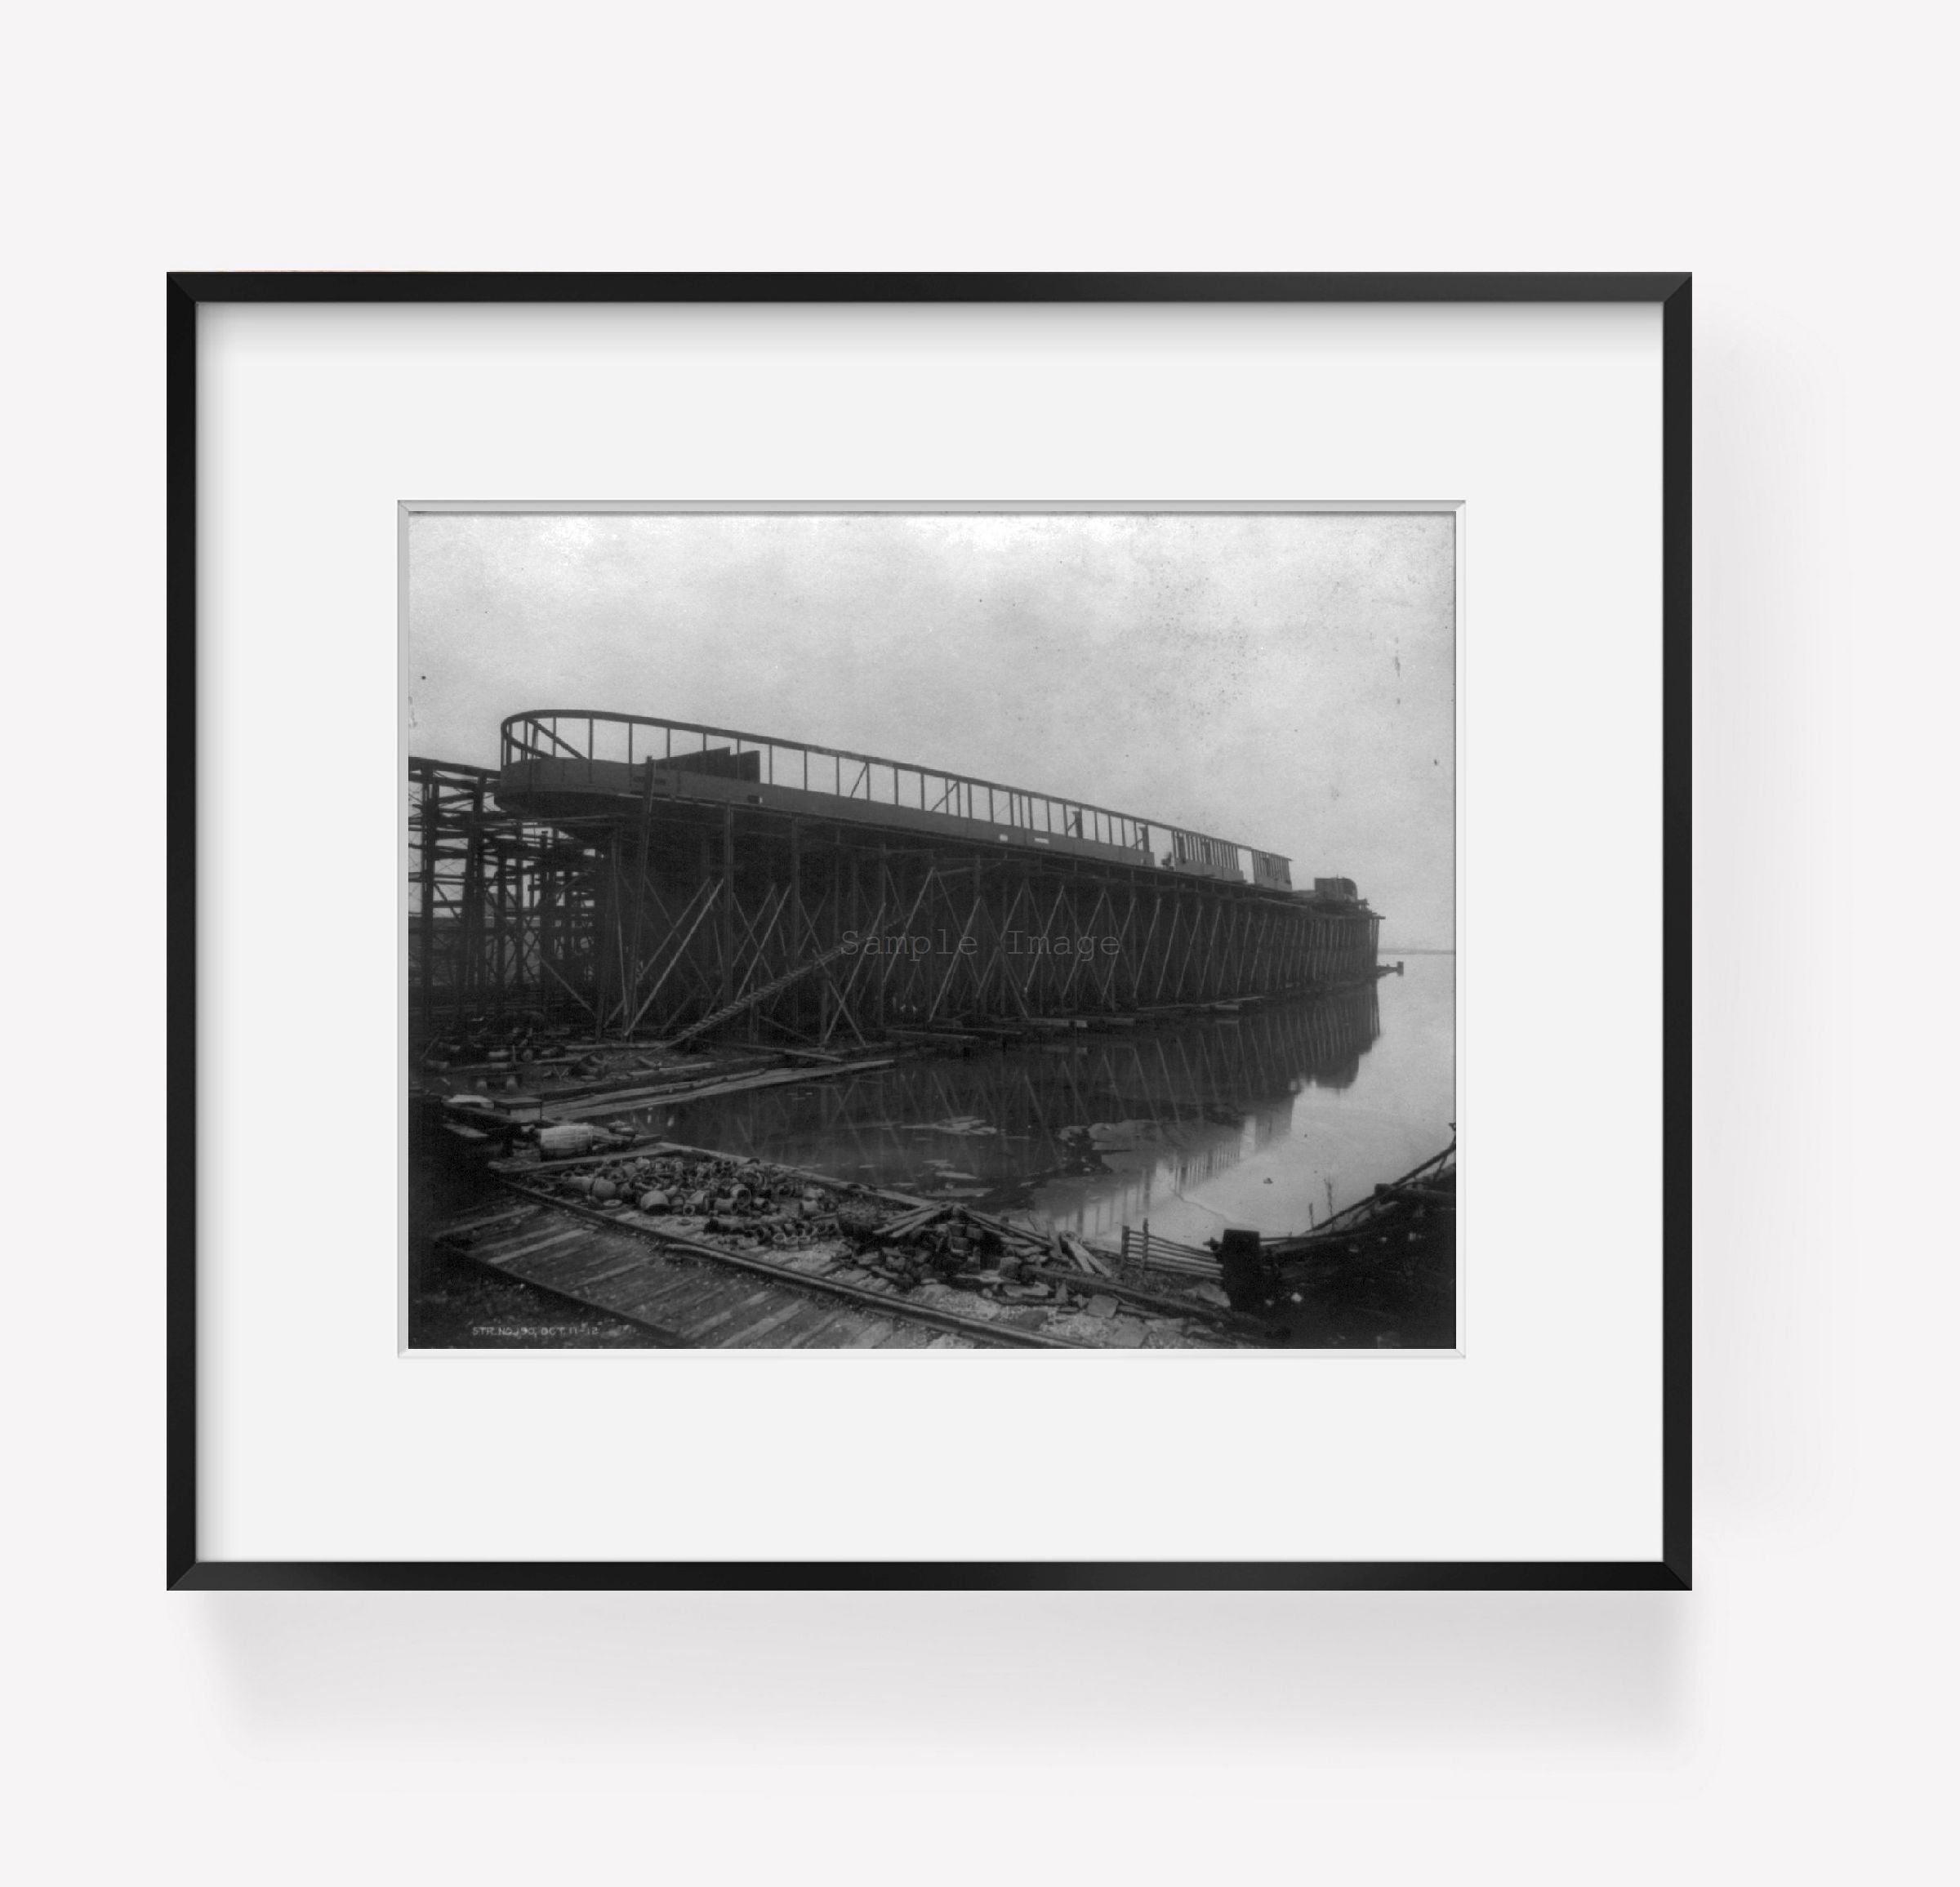 between 1903 and 1913 photograph of Construction of the Great Lakes steamer, See